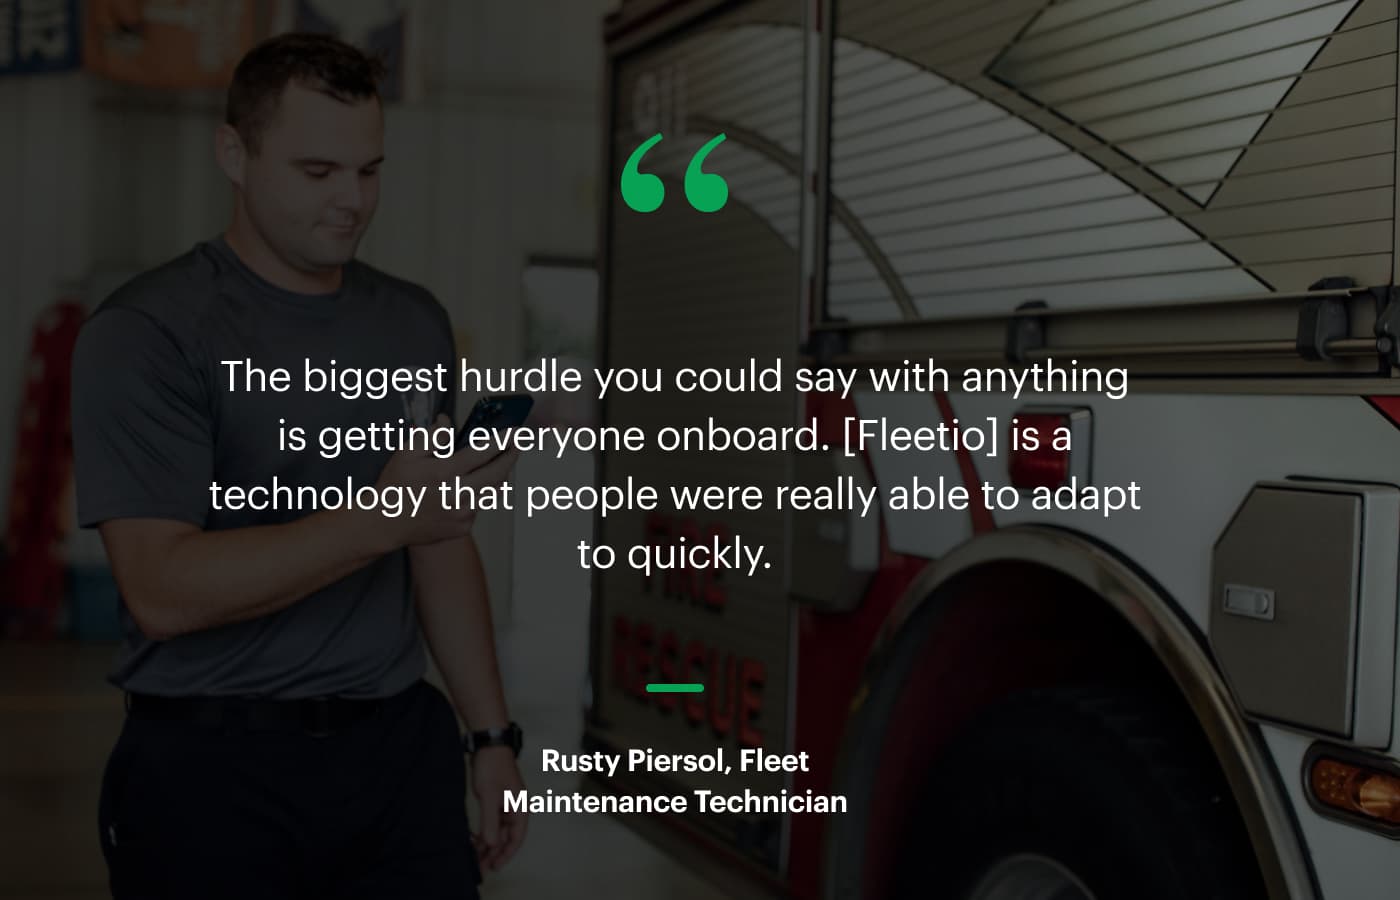 “The biggest hurdle you could say with anything is getting everyone onboard. [Fleetio] is a technology that people were really able to adapt to quickly.” – Rusty Piersol, Fleet Maintenance Technician